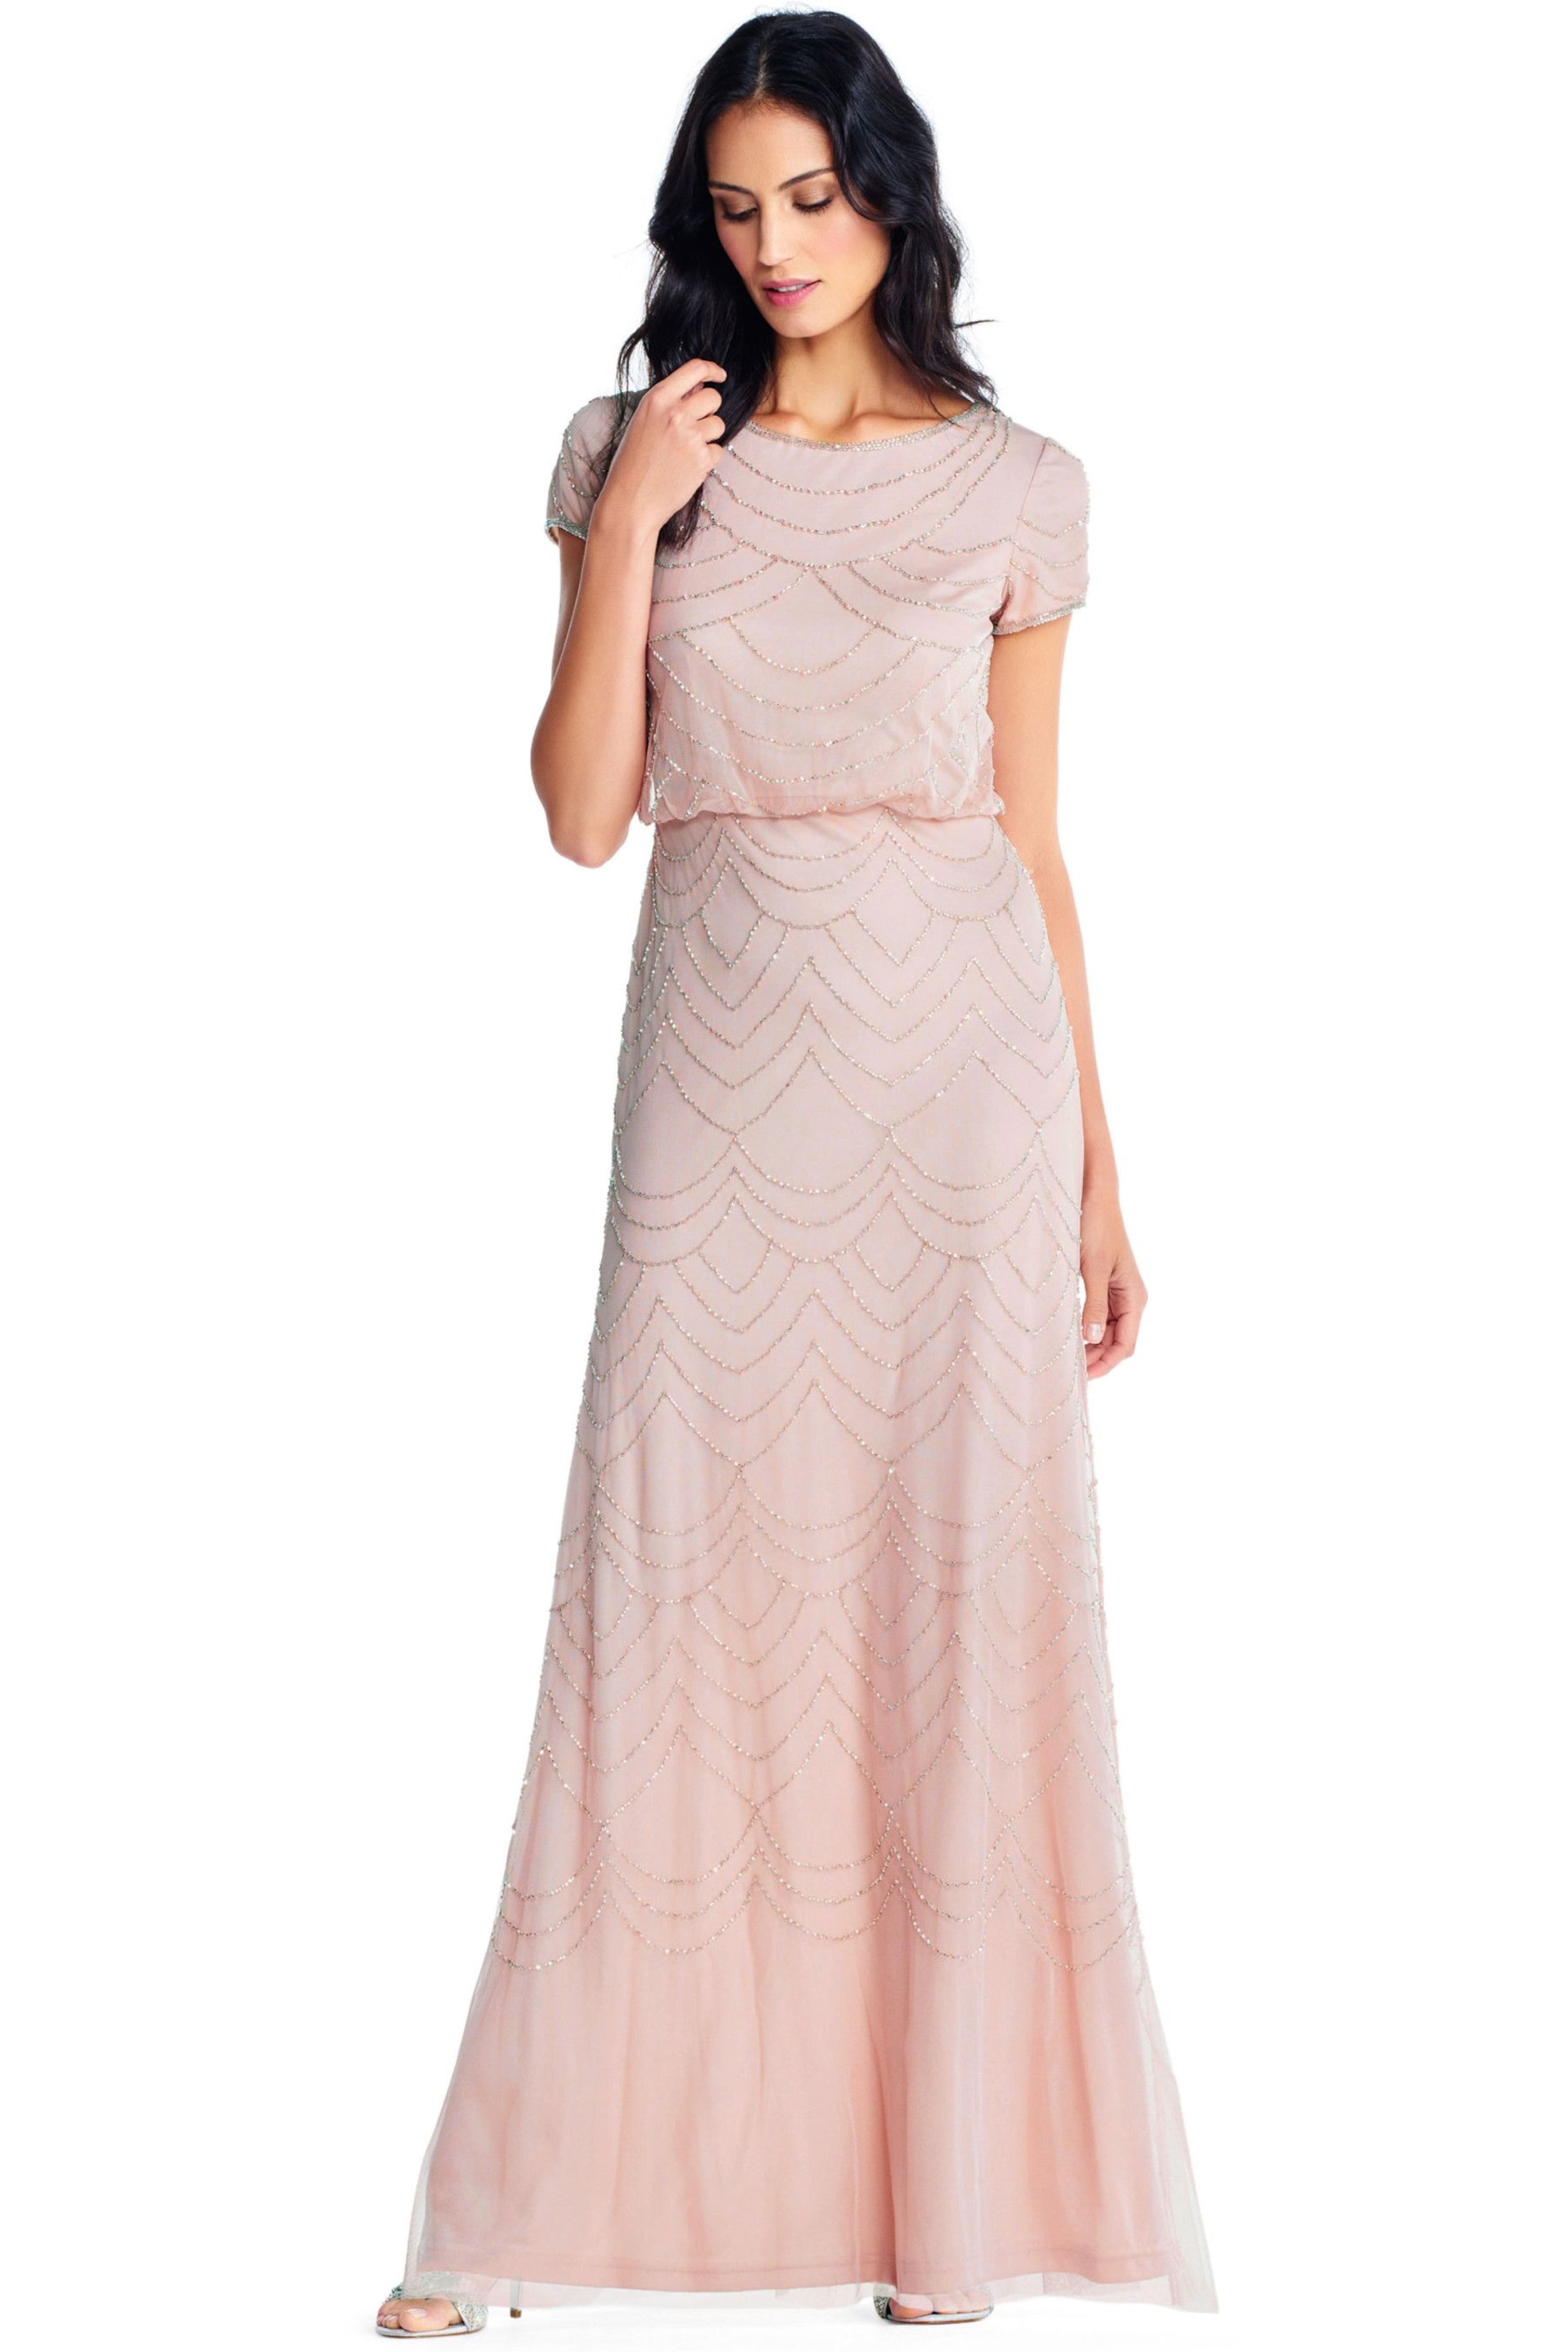 Adrianna Papell Blouson Beaded Pink Dress - Image 1 of 2